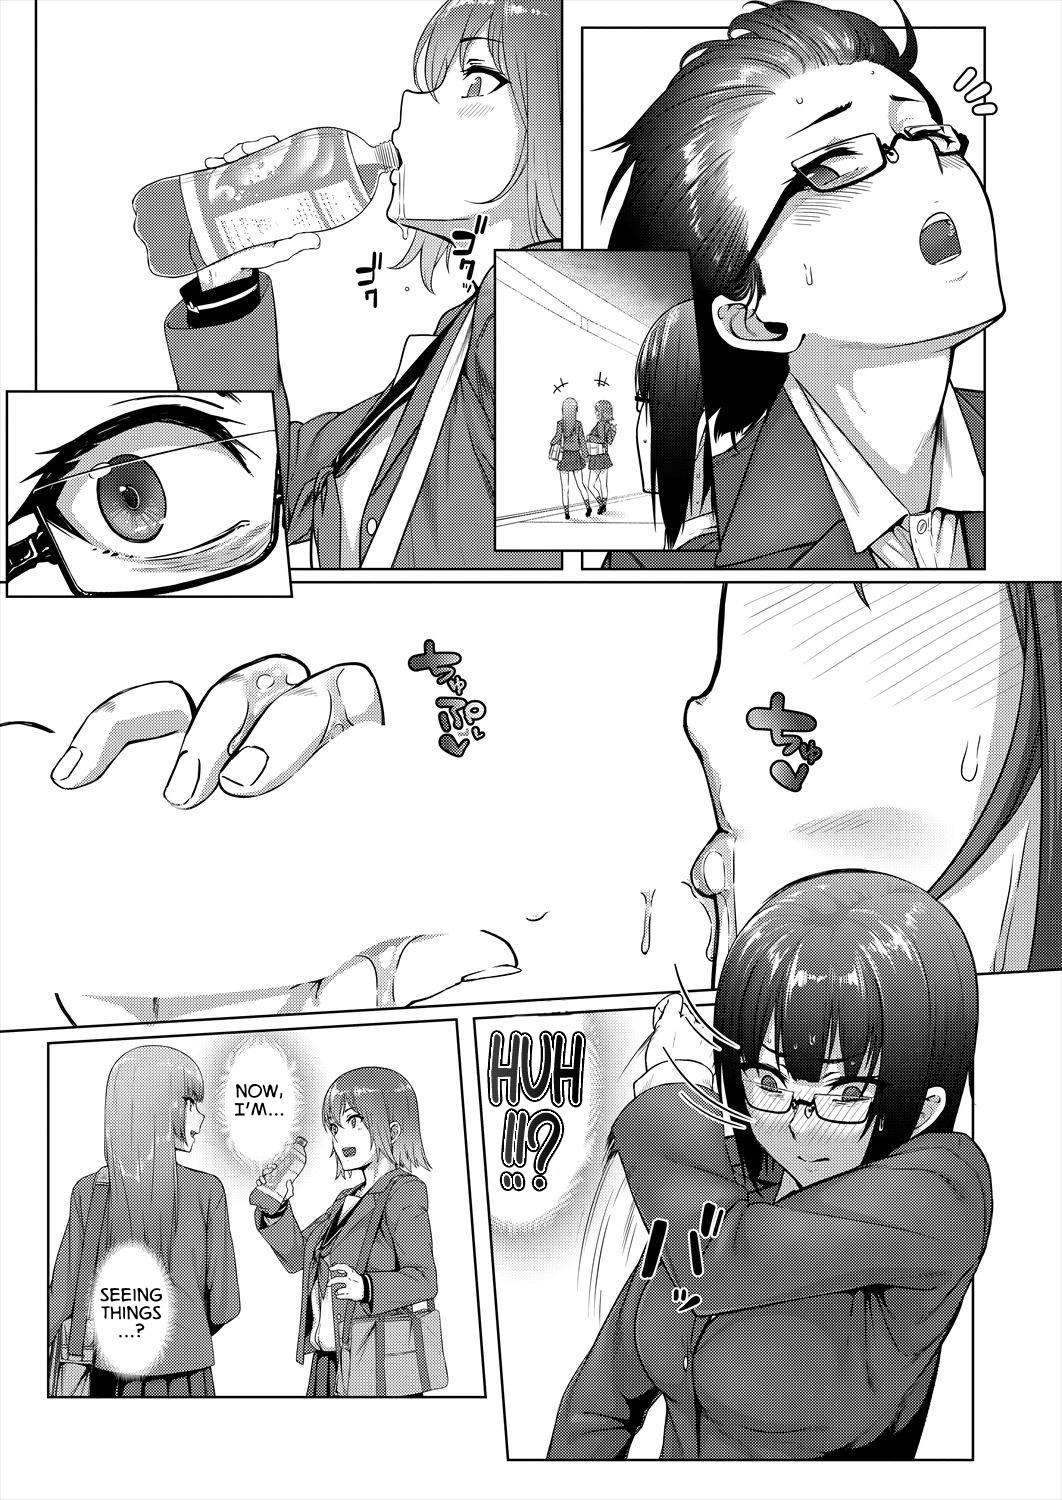 3some Kankyouon Ch. 1 | Banging Ambience Ch. 1 - Original Chicks - Page 7